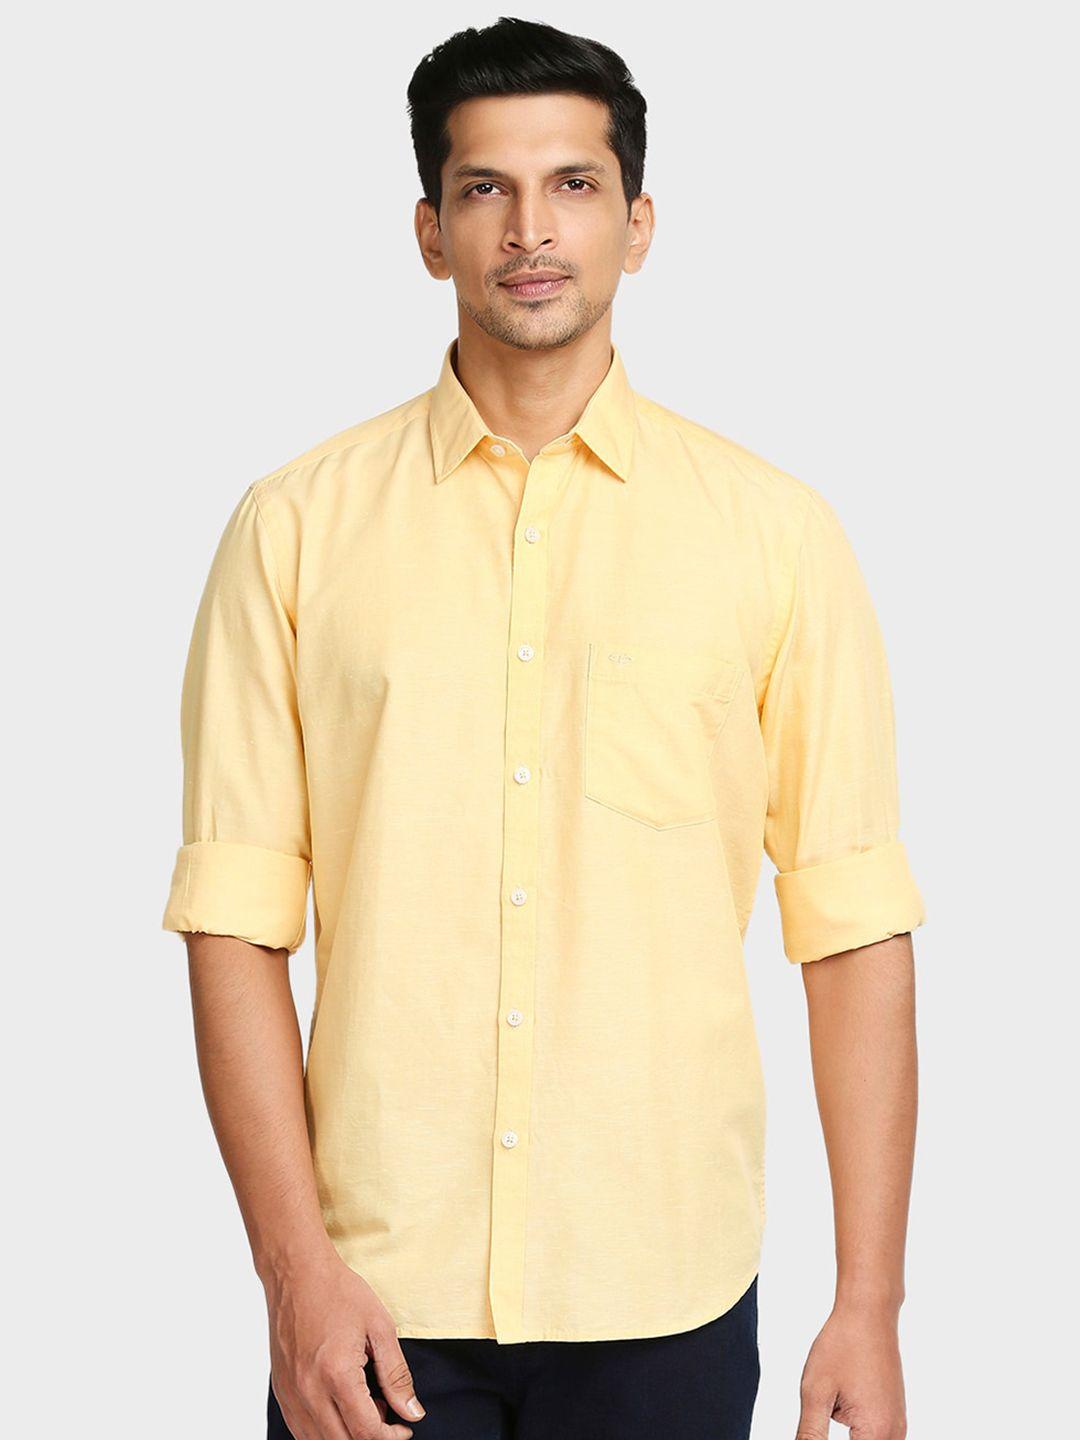 colorplus-men-yellow-tailored-fit-casual-shirt